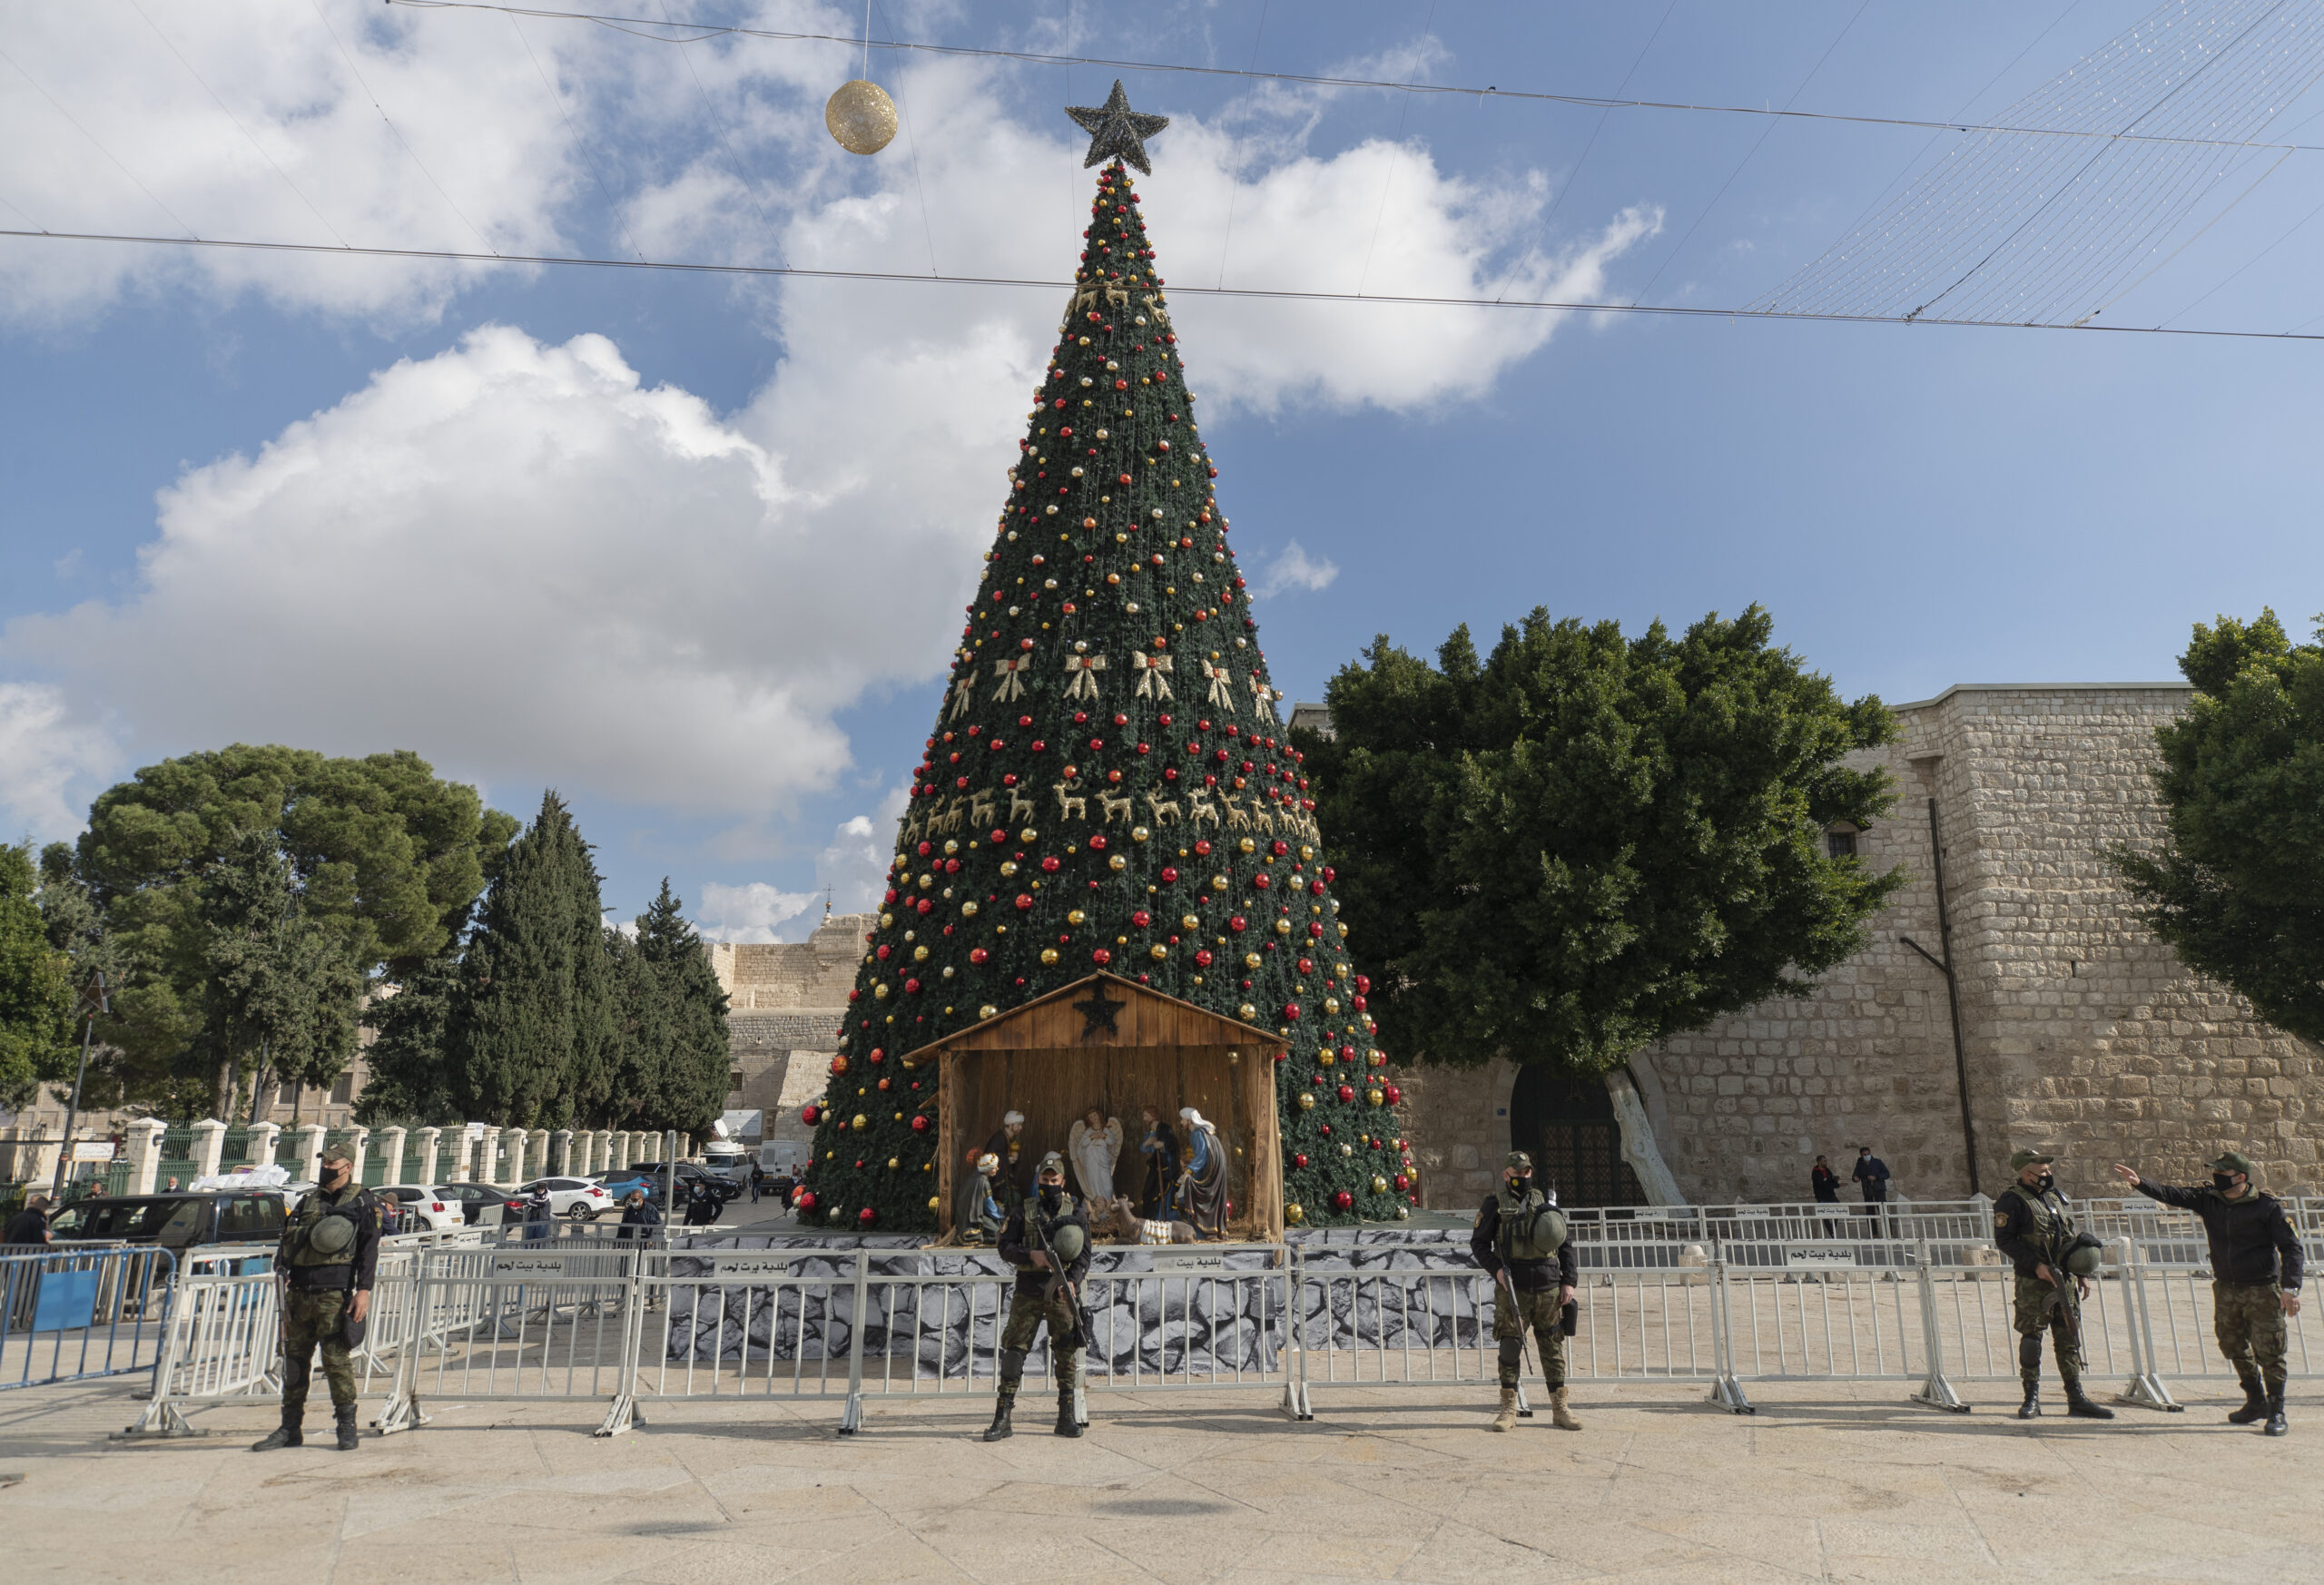 A Palestinian National security unit is deployed in Manger Square, adjacent to the Church of the Nativity, traditionally believed by Christians to be the birthplace of Jesus Christ, ahead of Christmas, in the West Bank city of Bethlehem, Wednesday, Dec. 23, 2020. (AP Photo/Nasser Nasser)